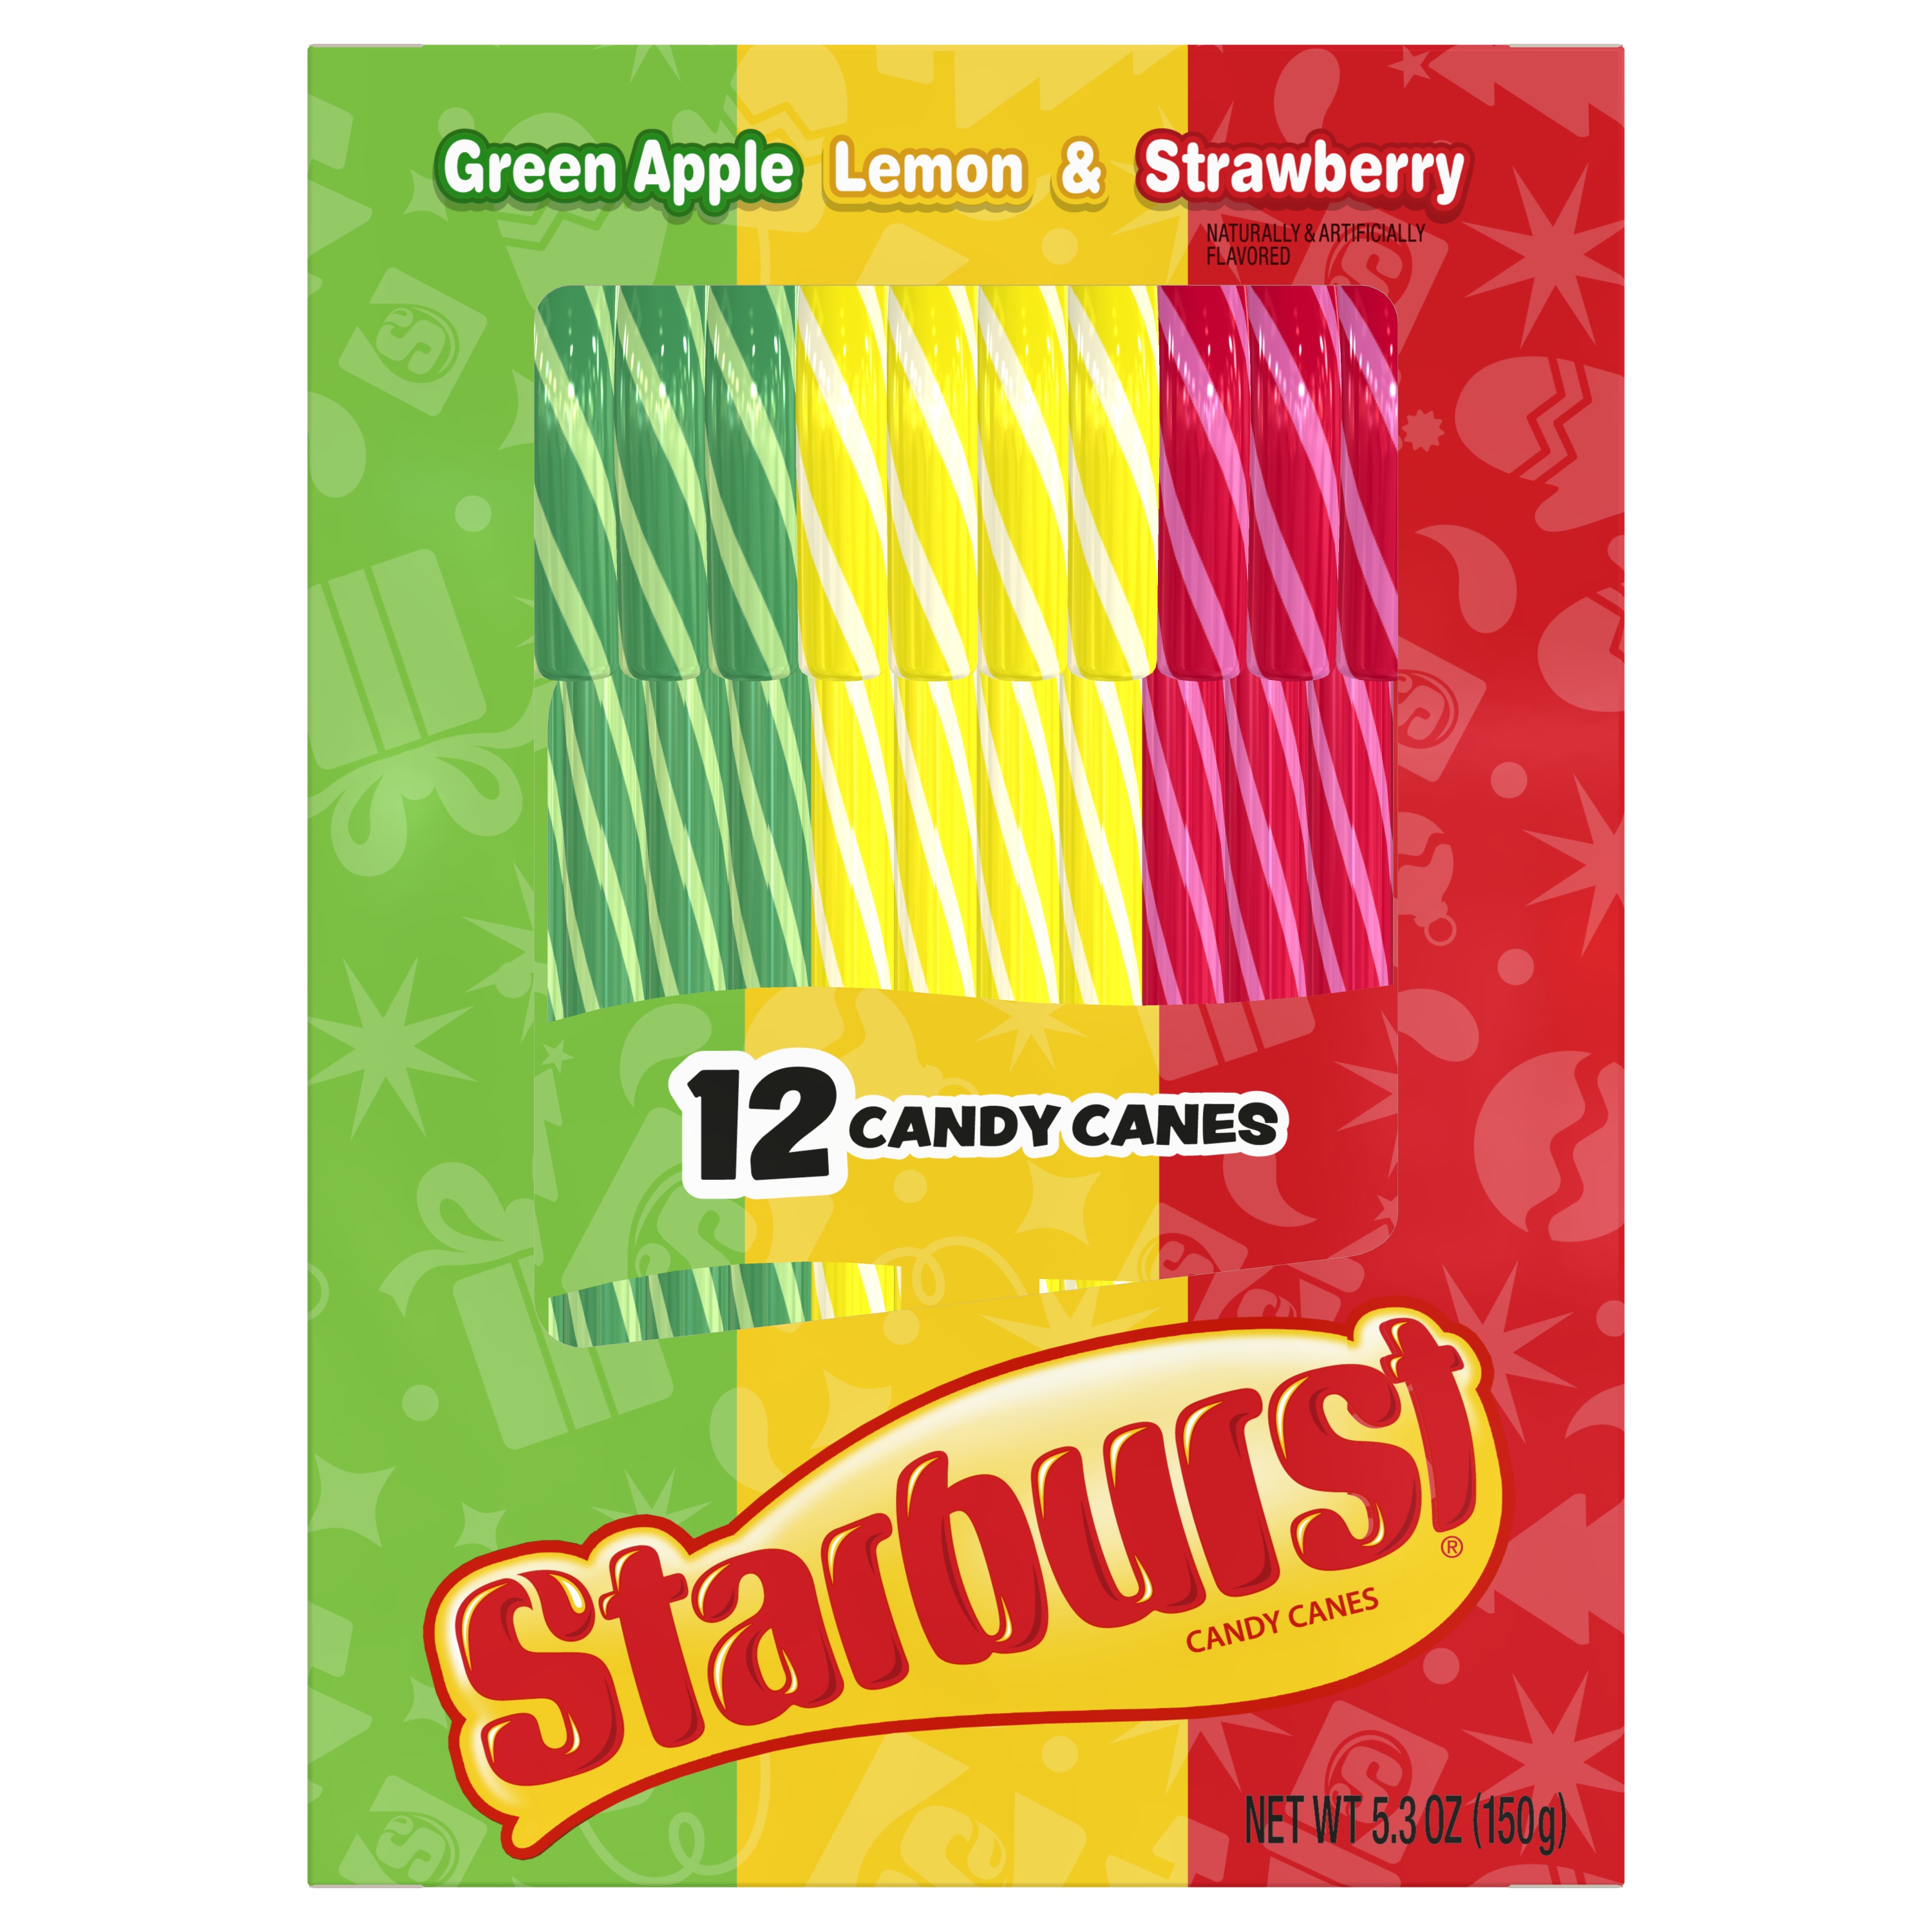 Starburst Assorted Fruit Flavors Christmas Candy Canes Stocking Stuffers, 5.3oz, 12 Count Box - image 1 of 7